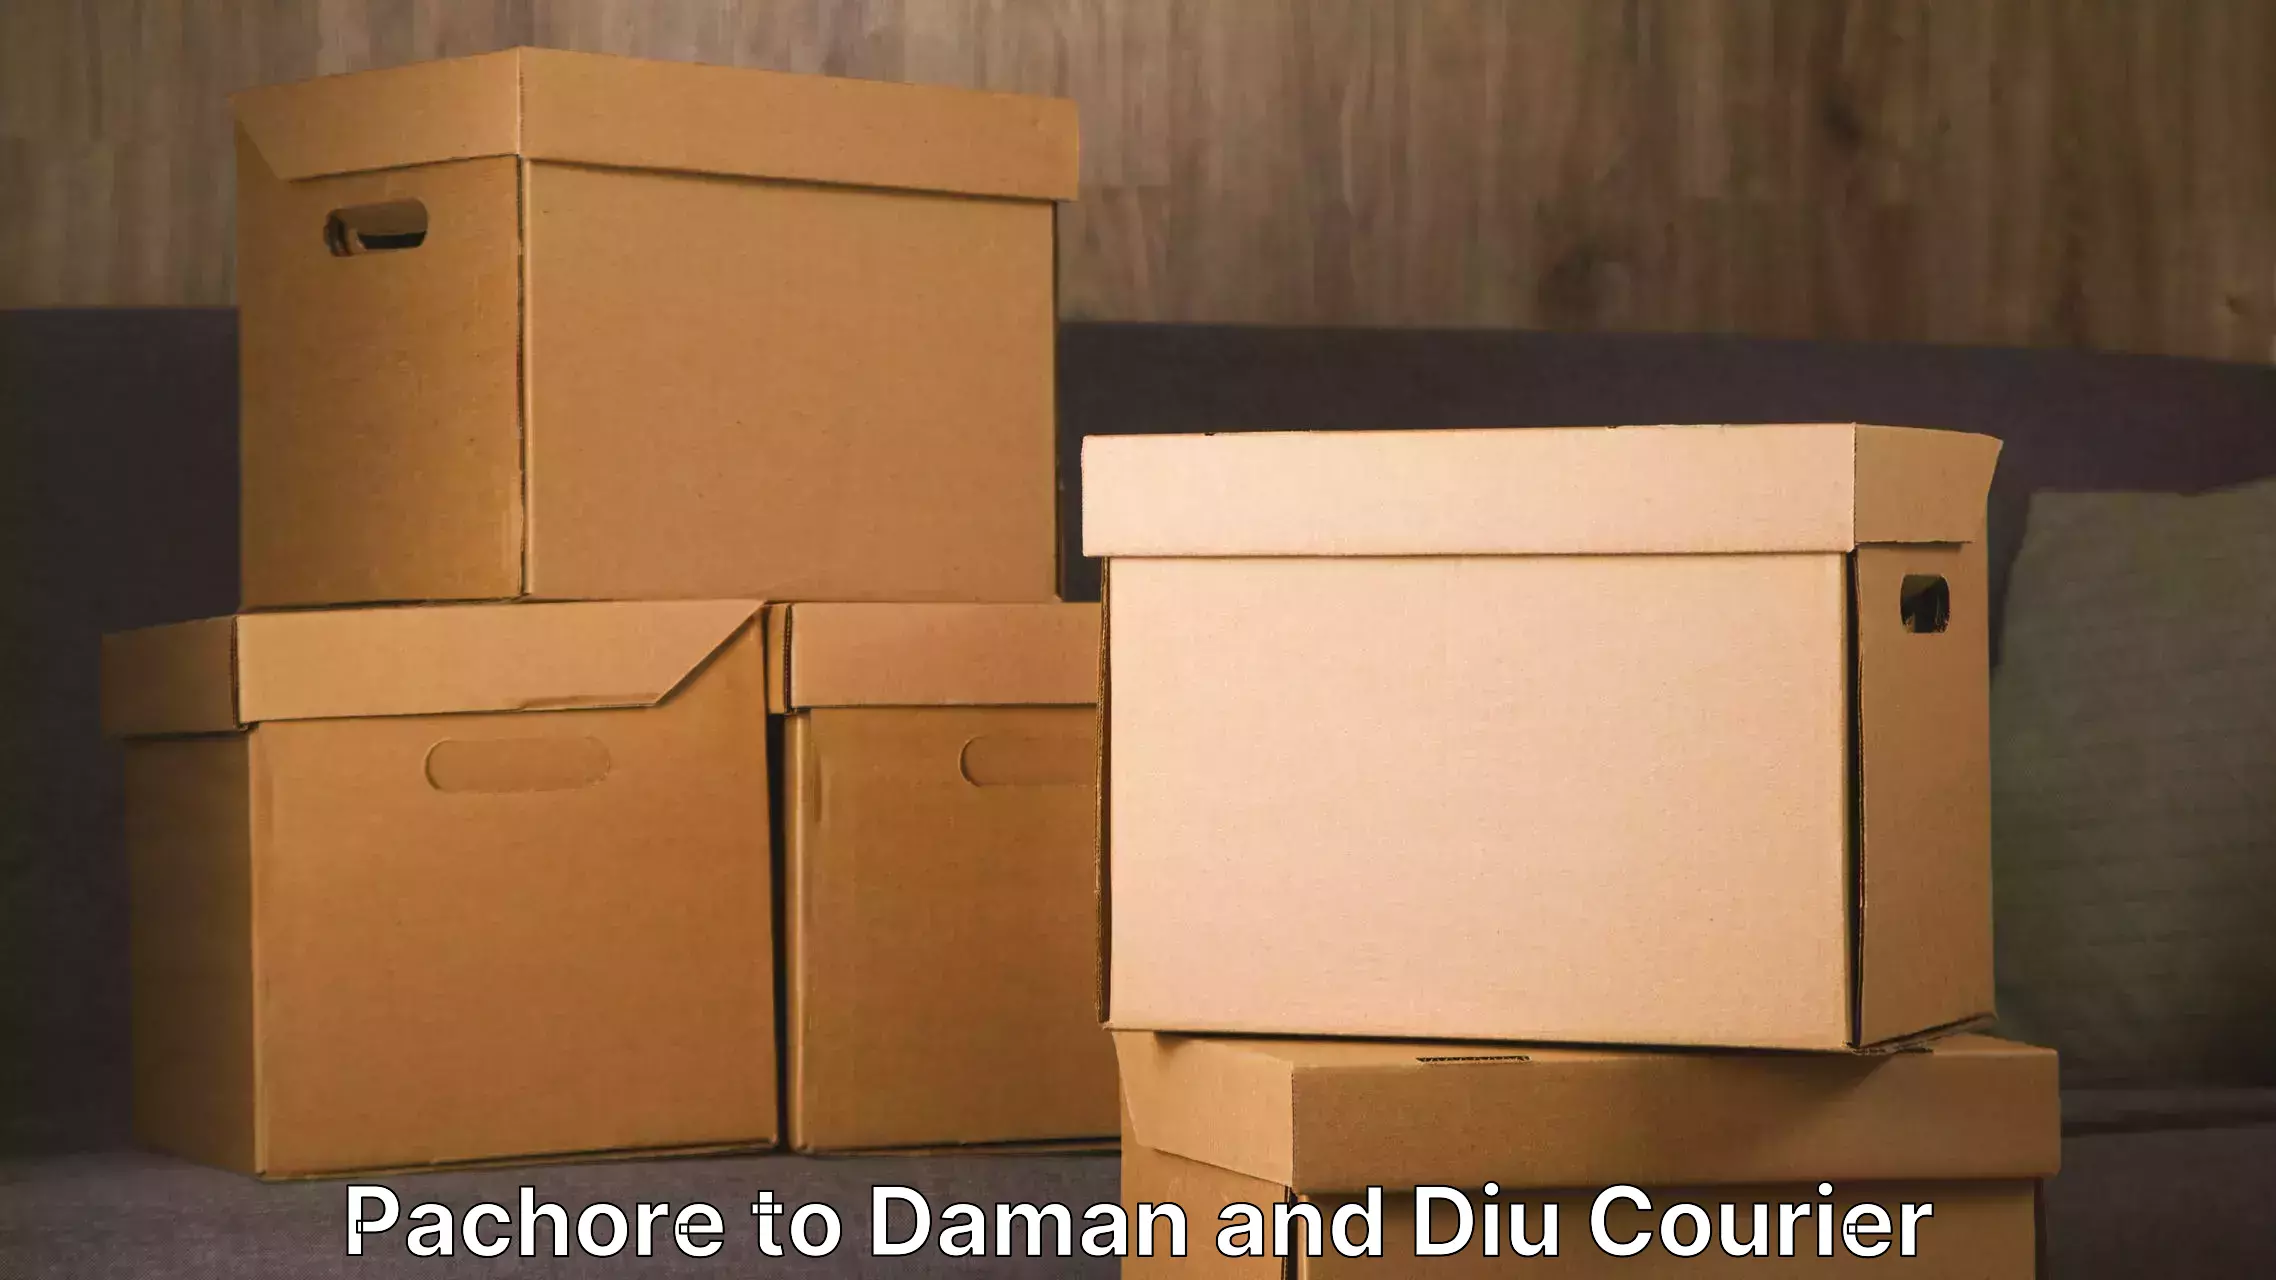 Full-service movers Pachore to Diu